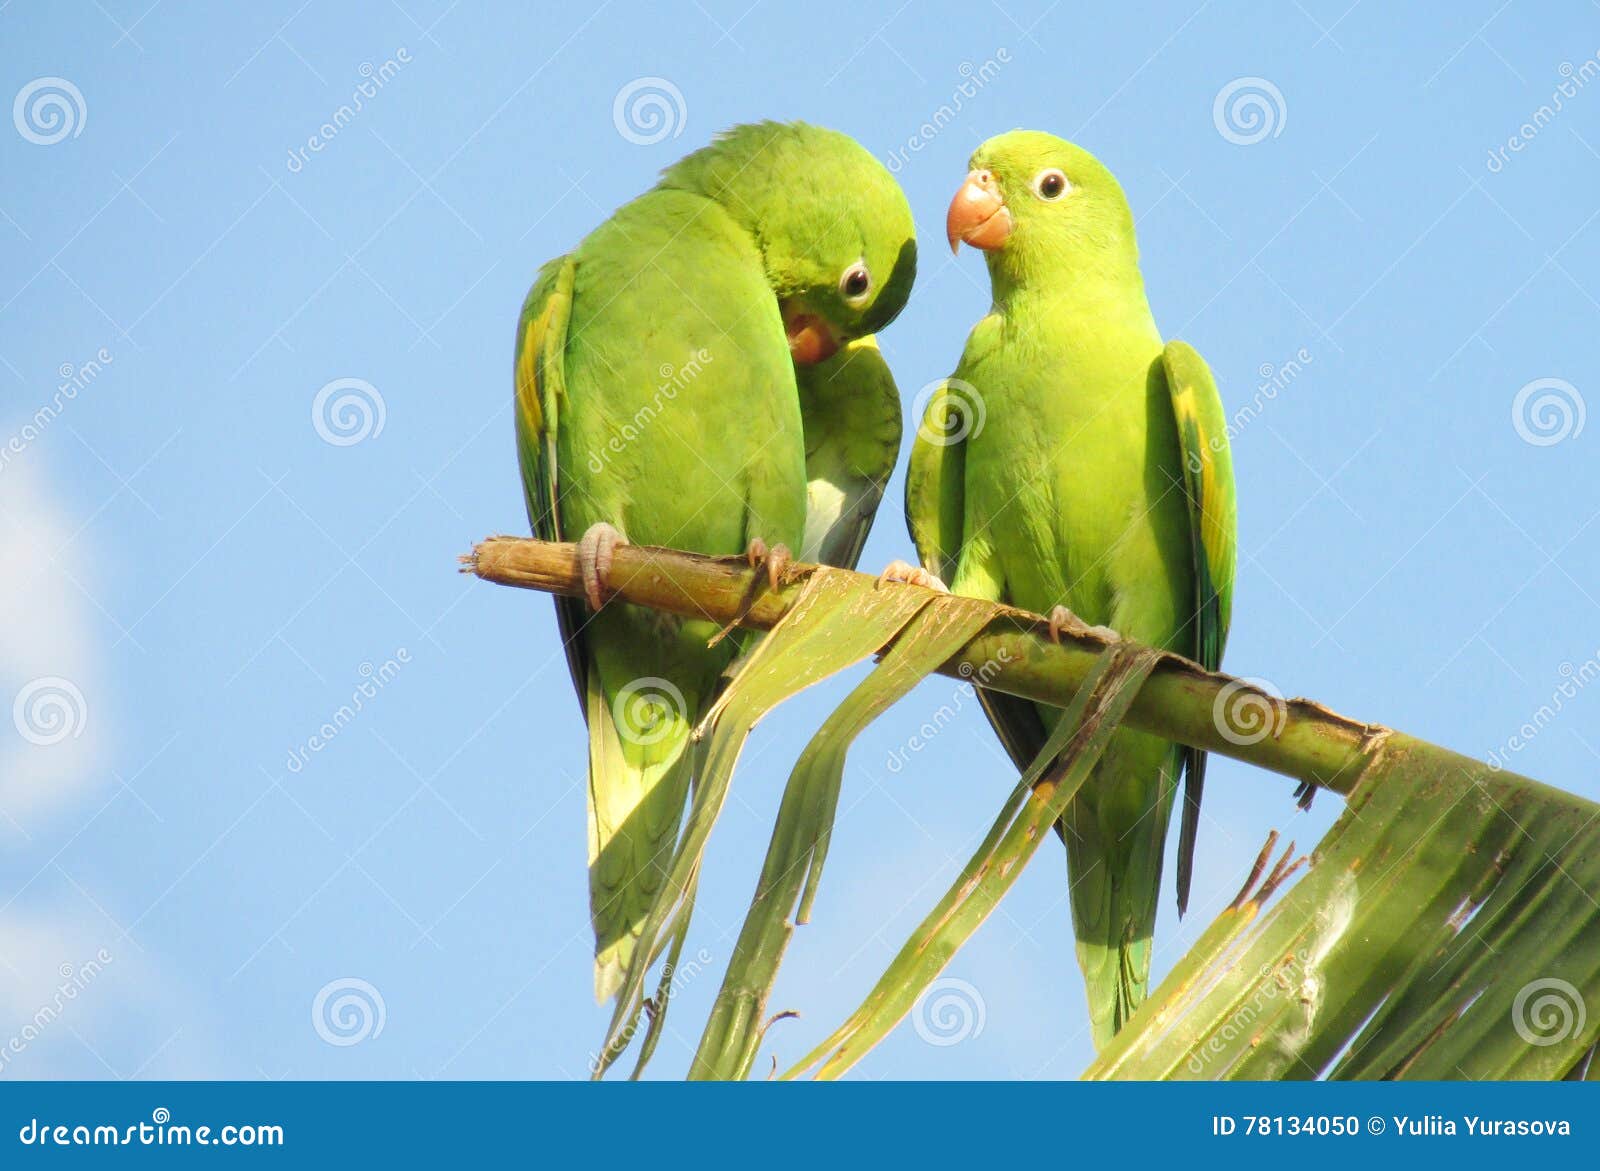 Cute Green Parrot on the Tree Stock Photo - Image of cute, bill ...